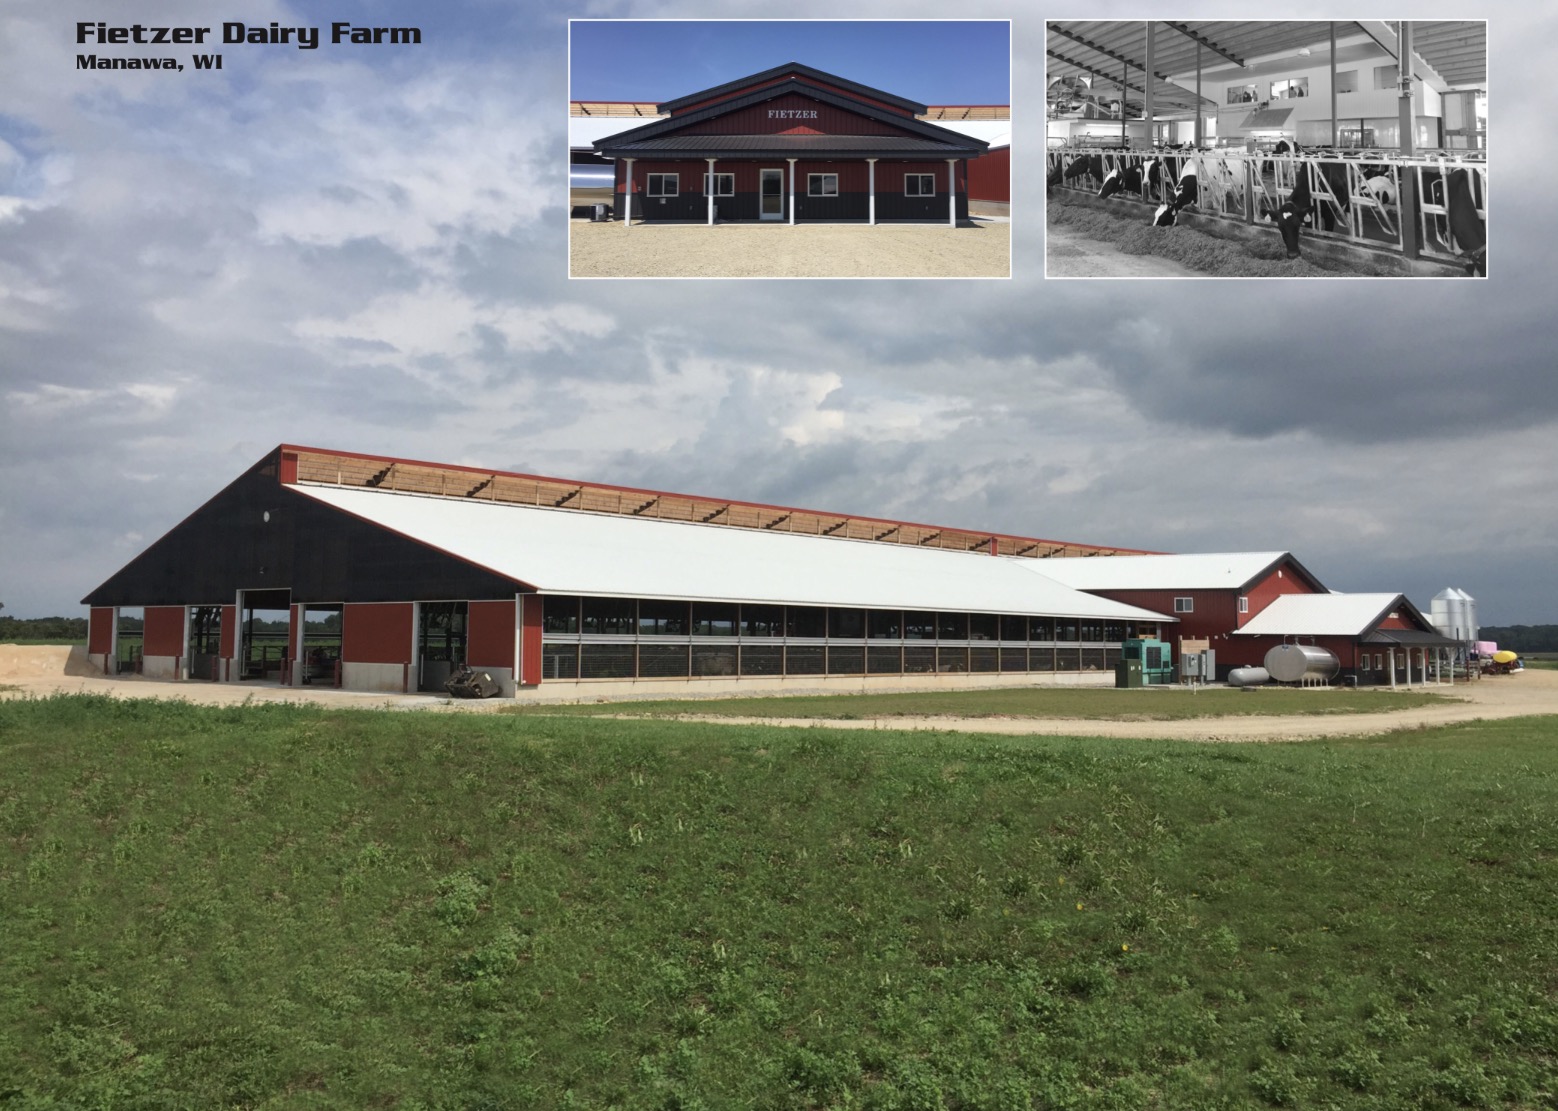 Agricultural Construction: Robotdairy & Freestall Barn:  Fietzer Dairy Farm, Manawa, WI